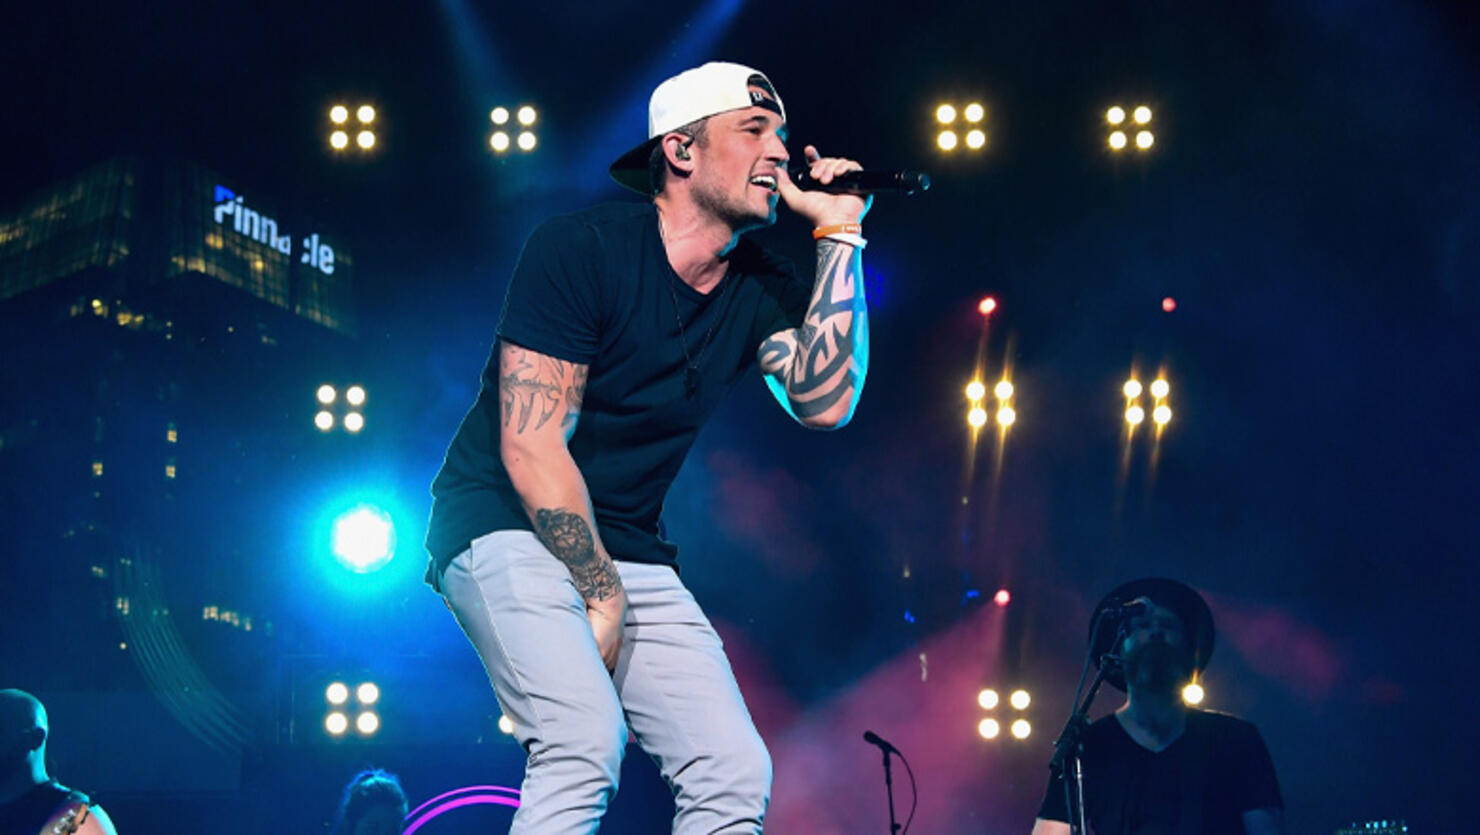 What Smash Hit Does Michael Ray Regret Not Recording? | iHeart